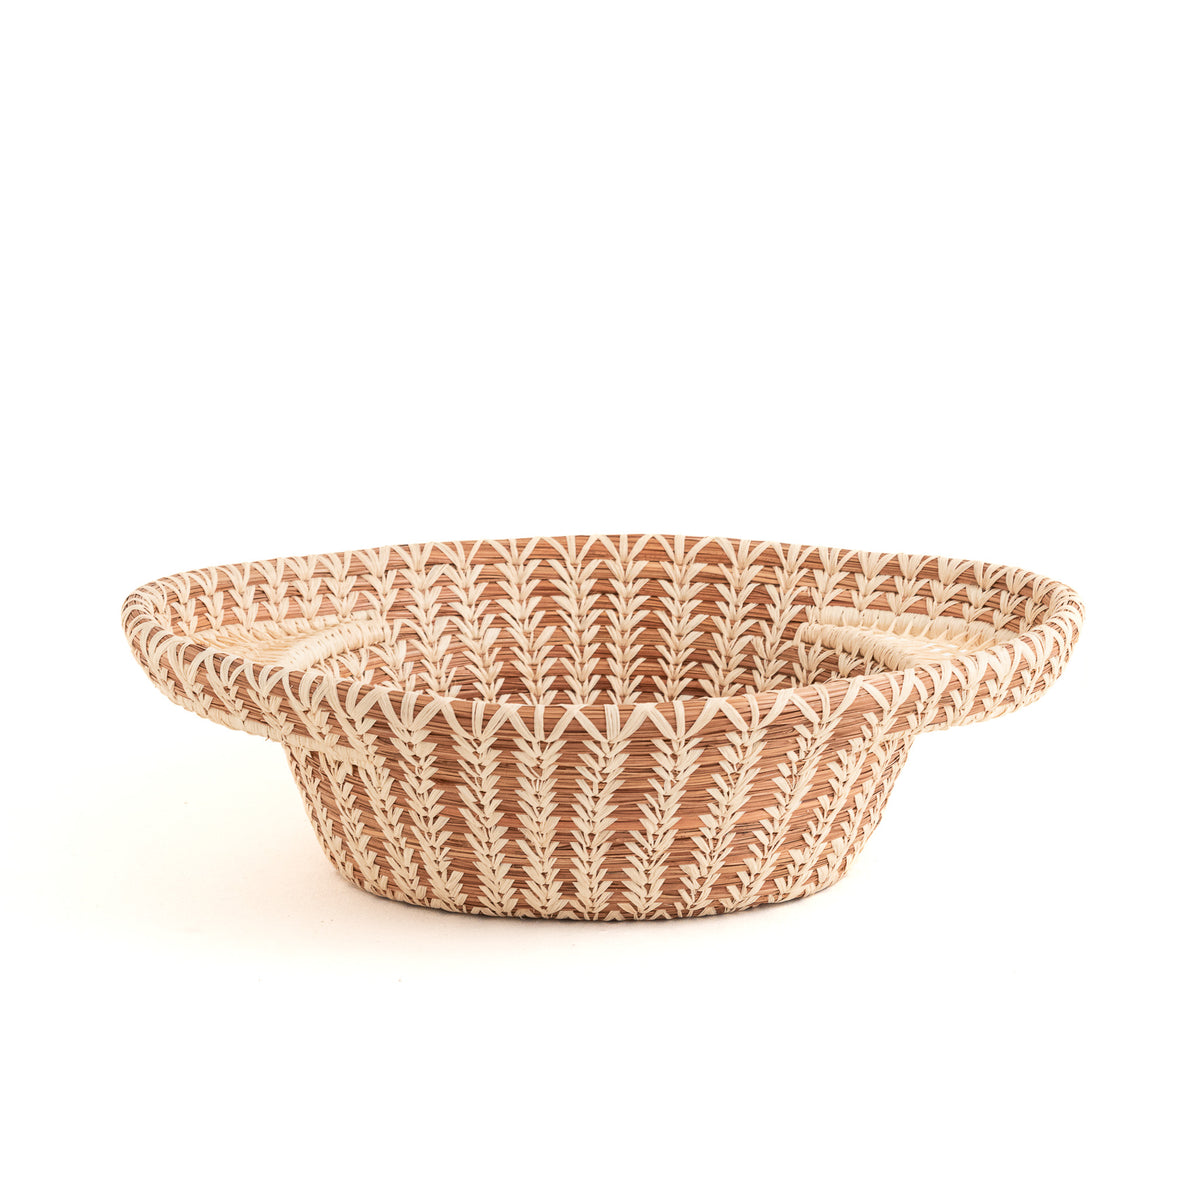 Pine Needle Basket with Lacy Handles side view